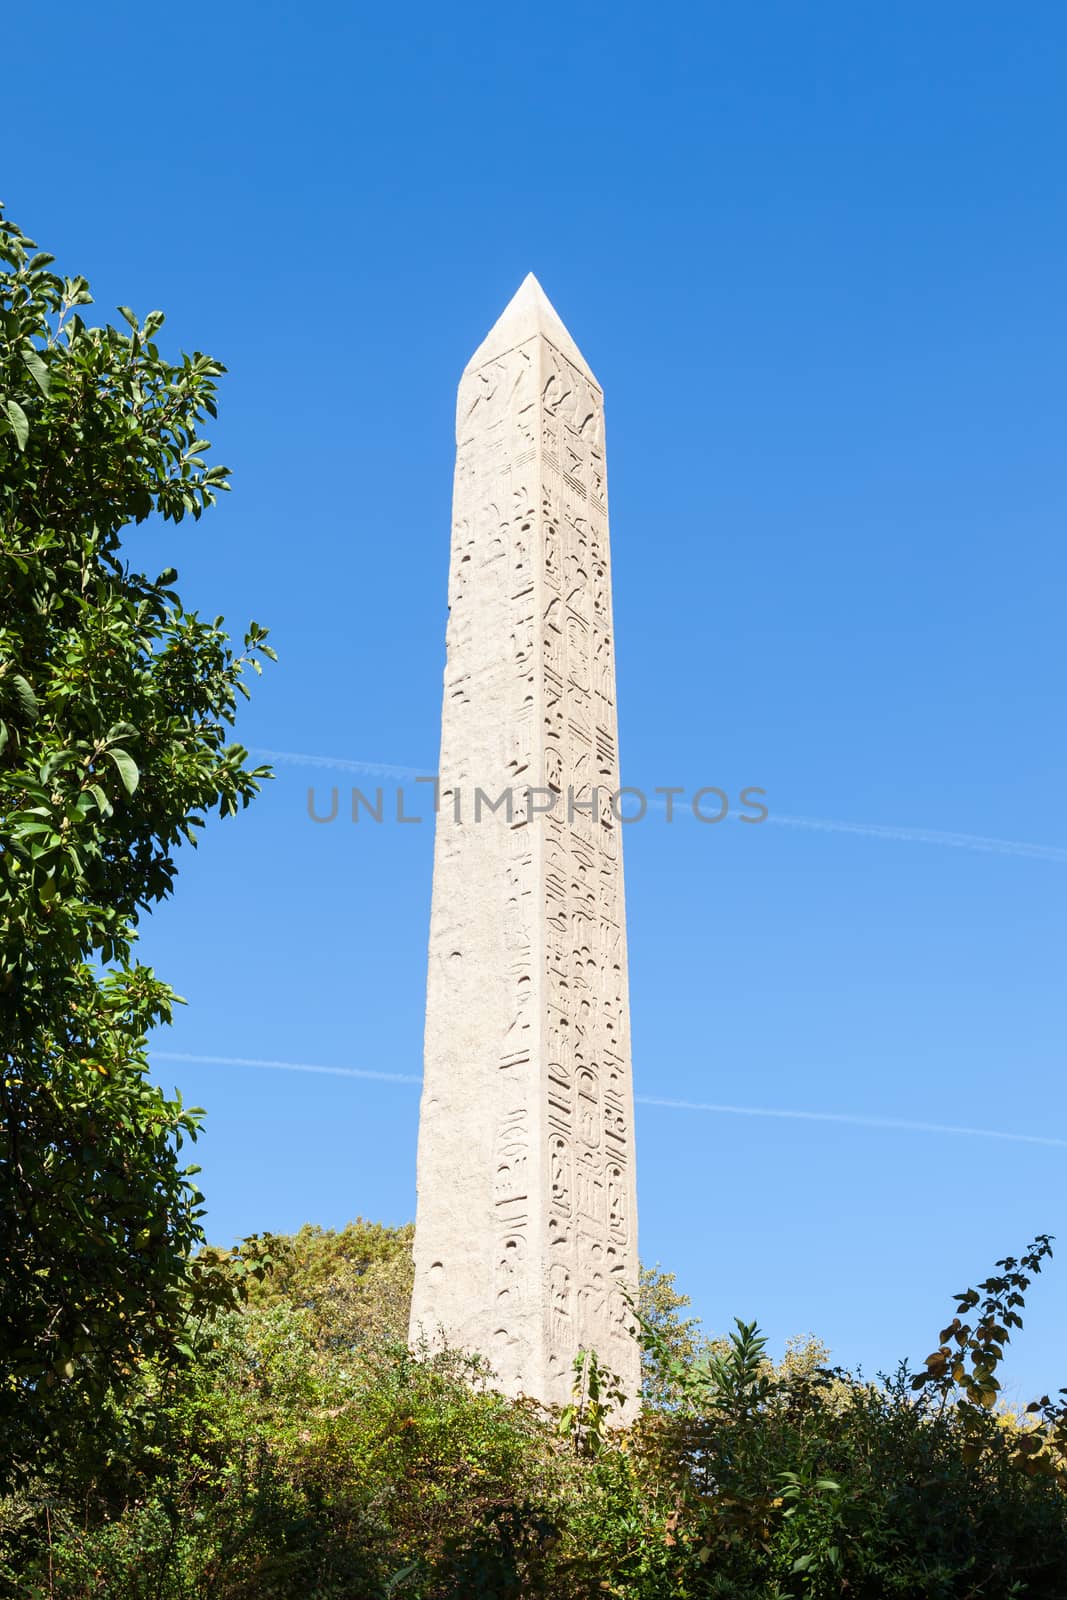 Cleopatra's Needle is  an Egyptian obelisk located in Central Park, New York City in the United States of America.